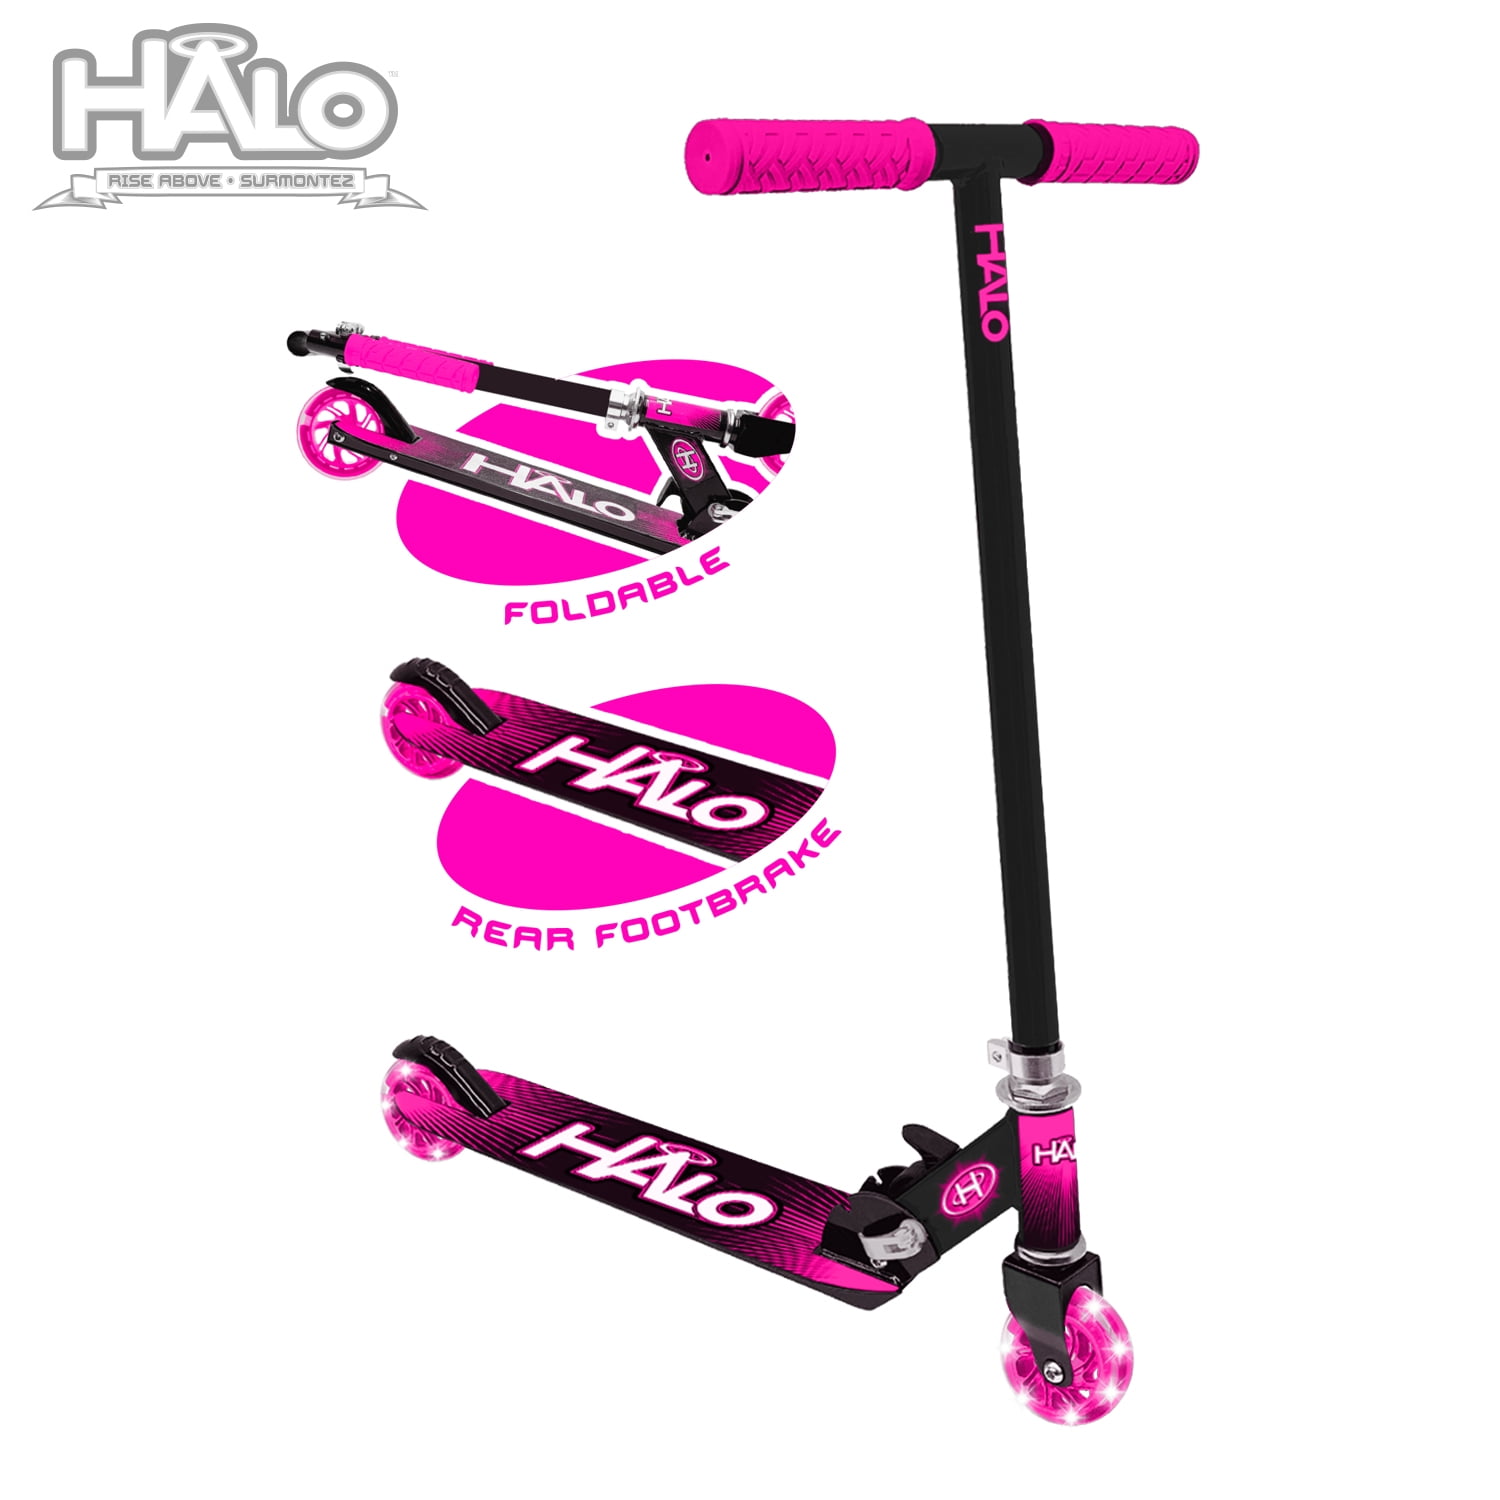 HALO Rise Above 6 Piece Inline Scooter Complete Combo Set Purple only  NEW 